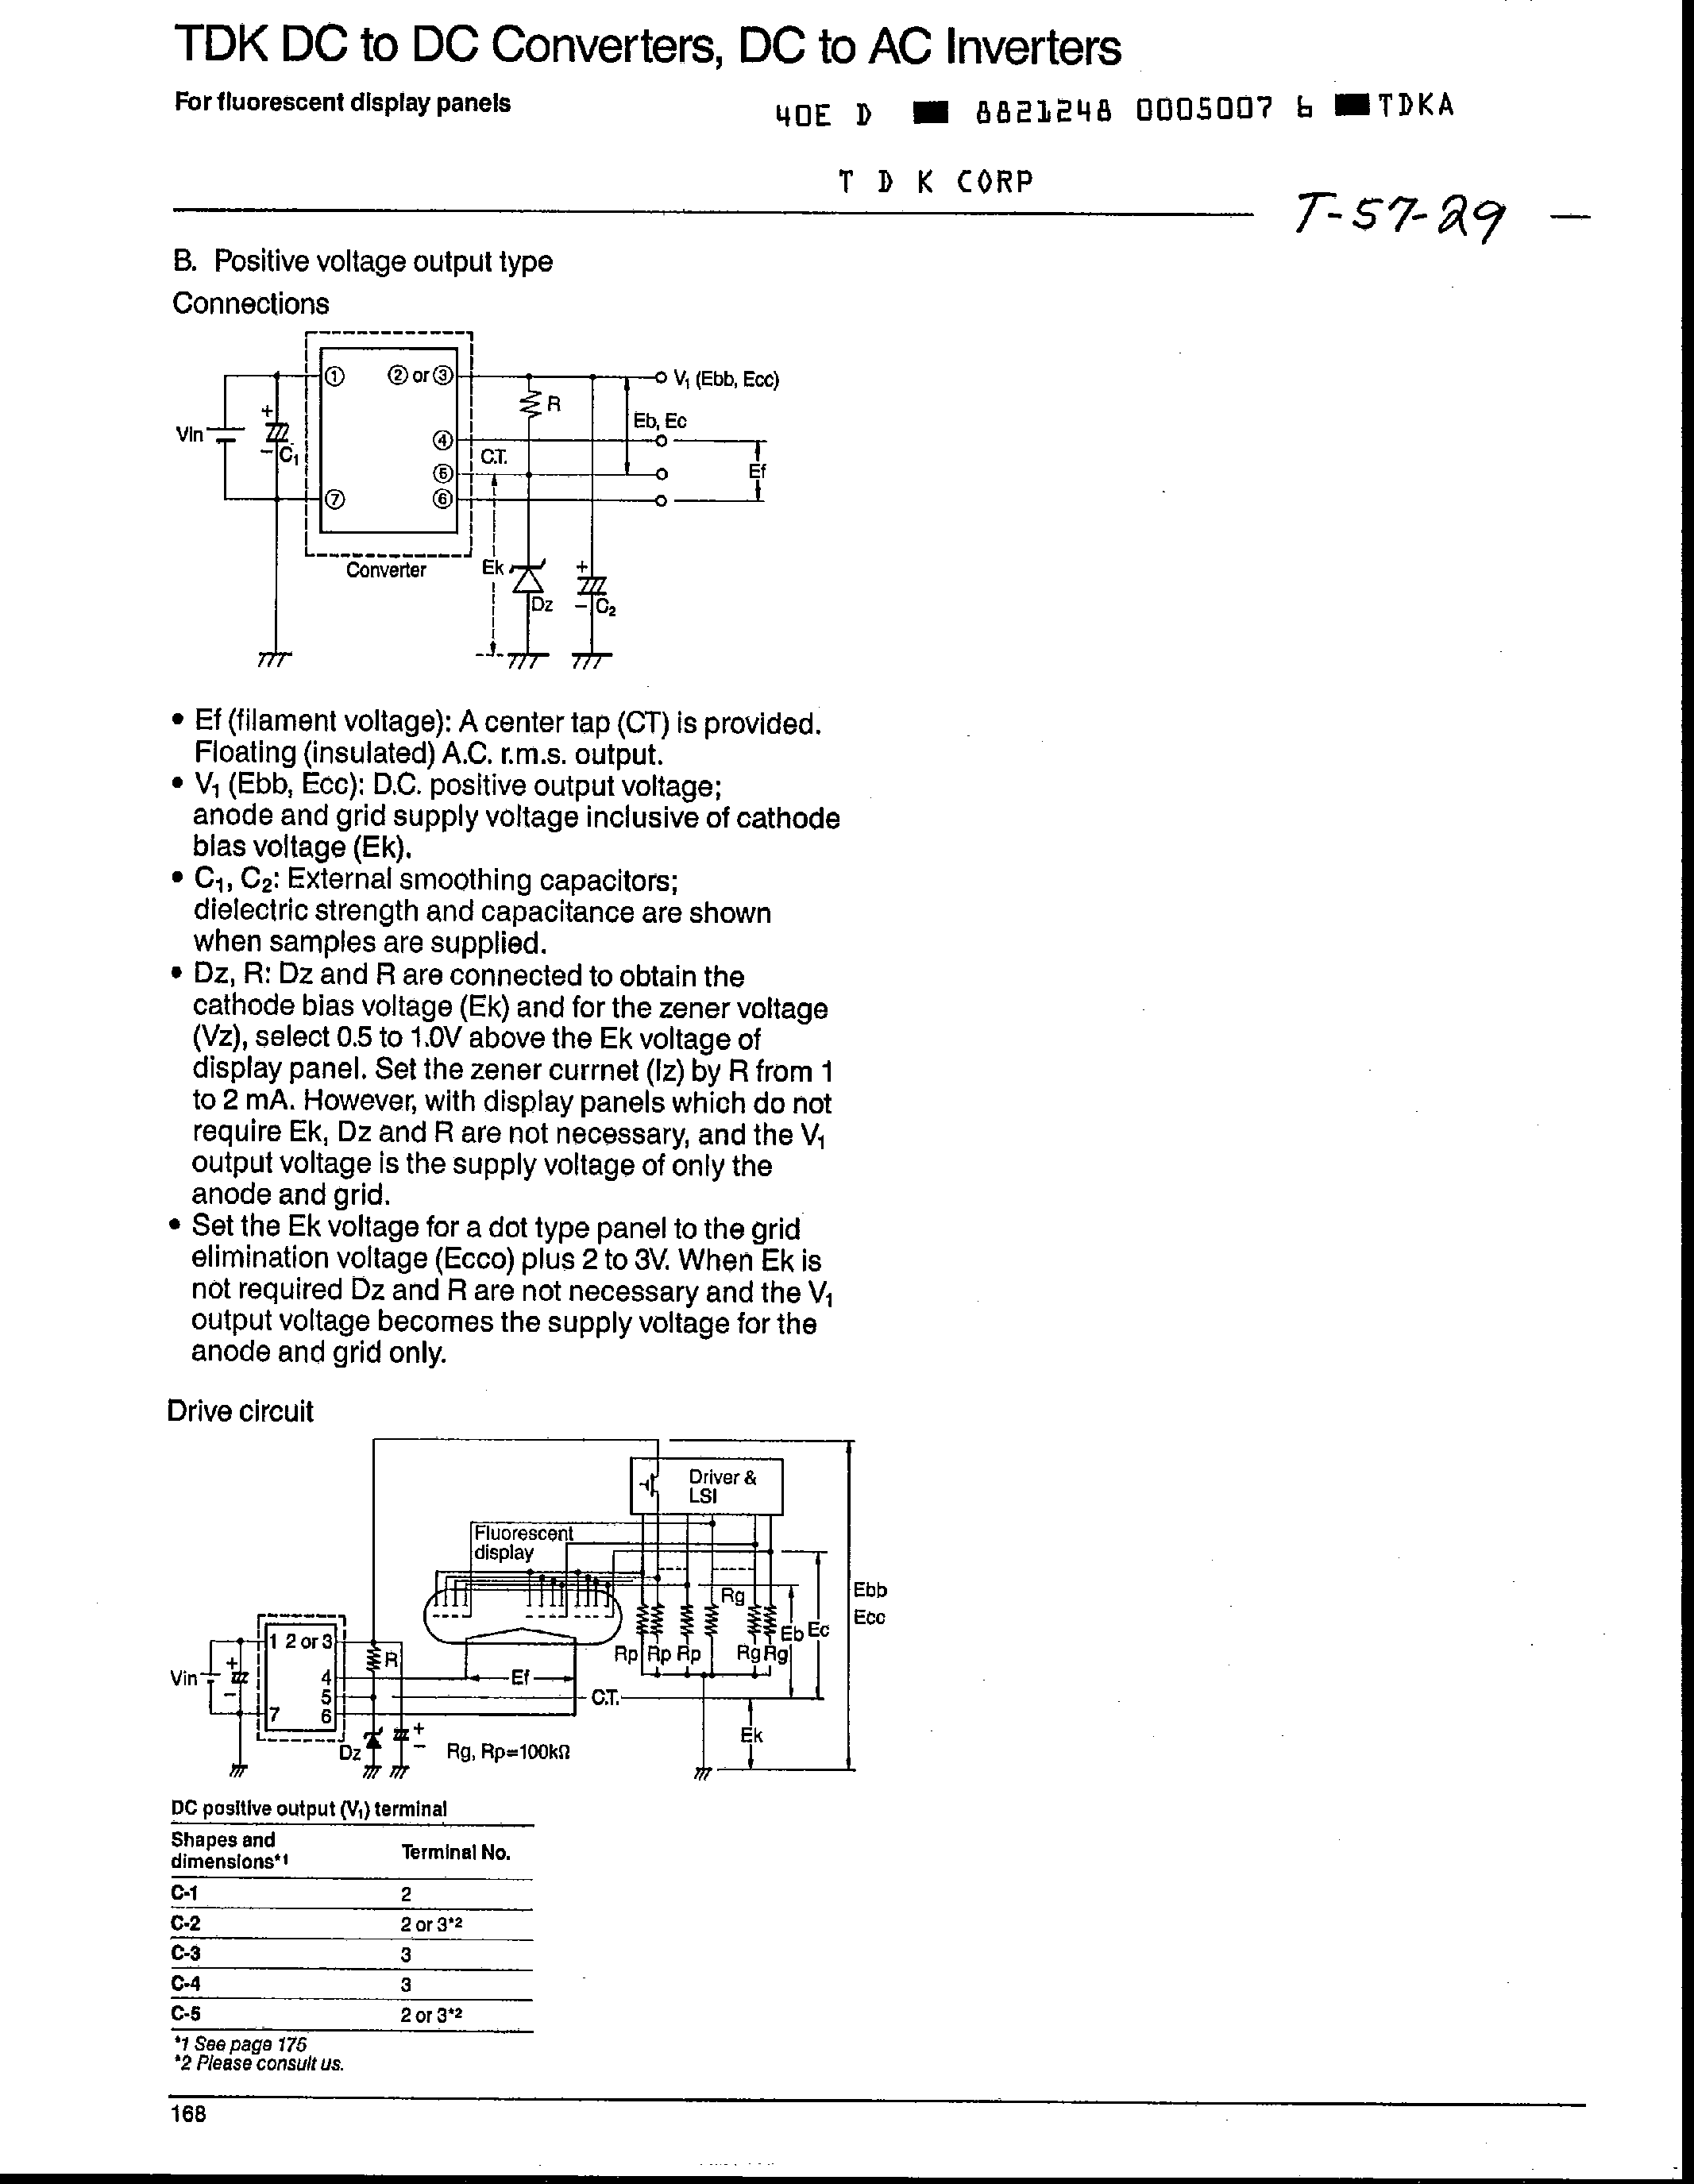 Datasheet CD1863 - DC to DC Converters / DC to AC Inverters page 2